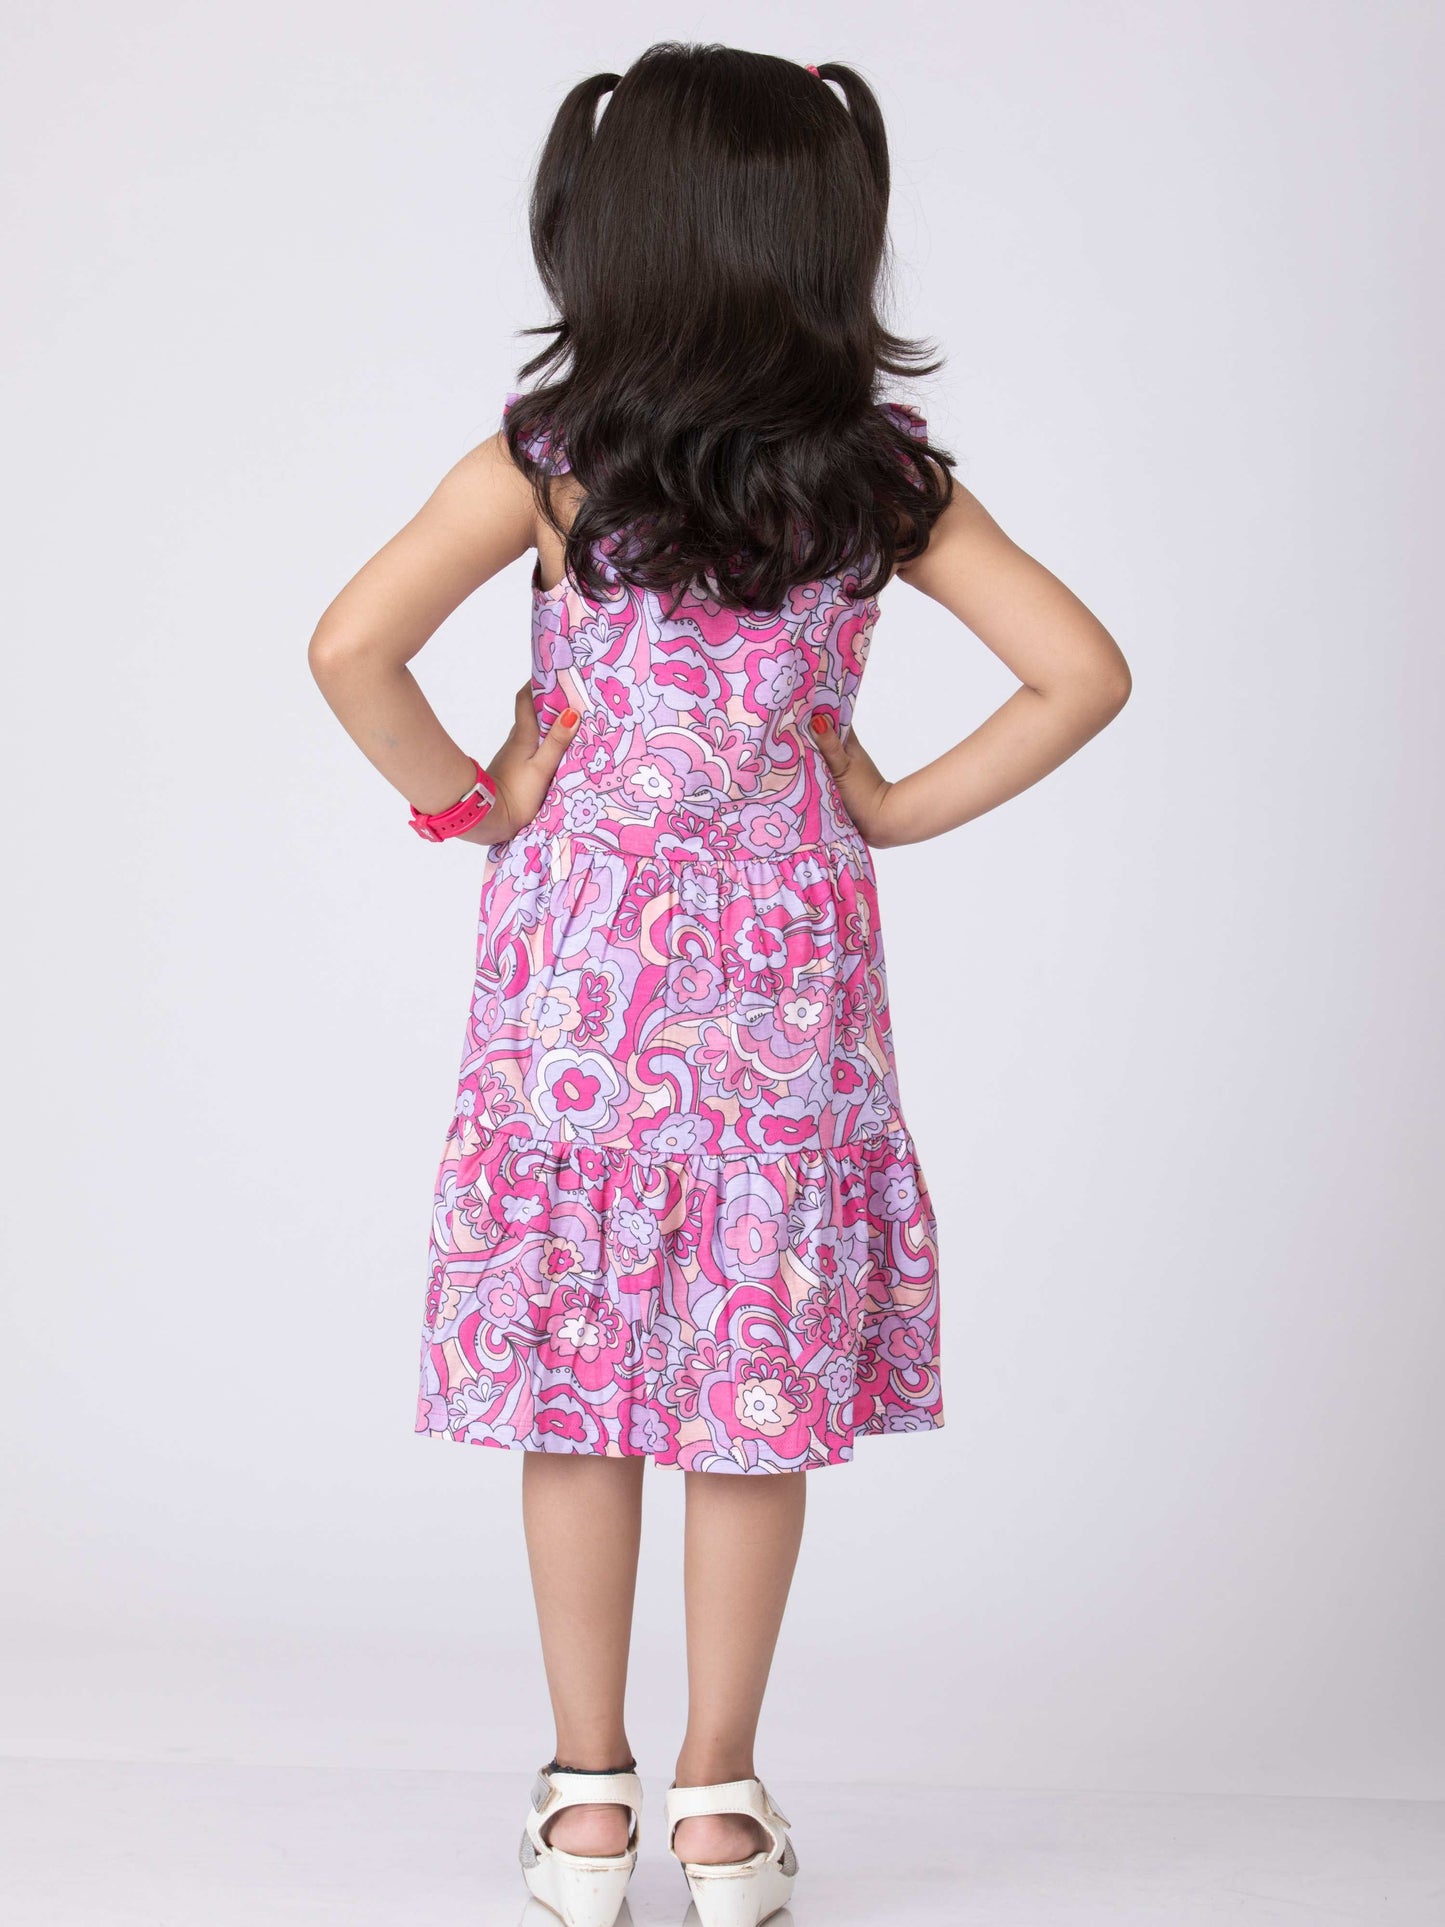 Berry Bay Adorable Printed Girls Frock